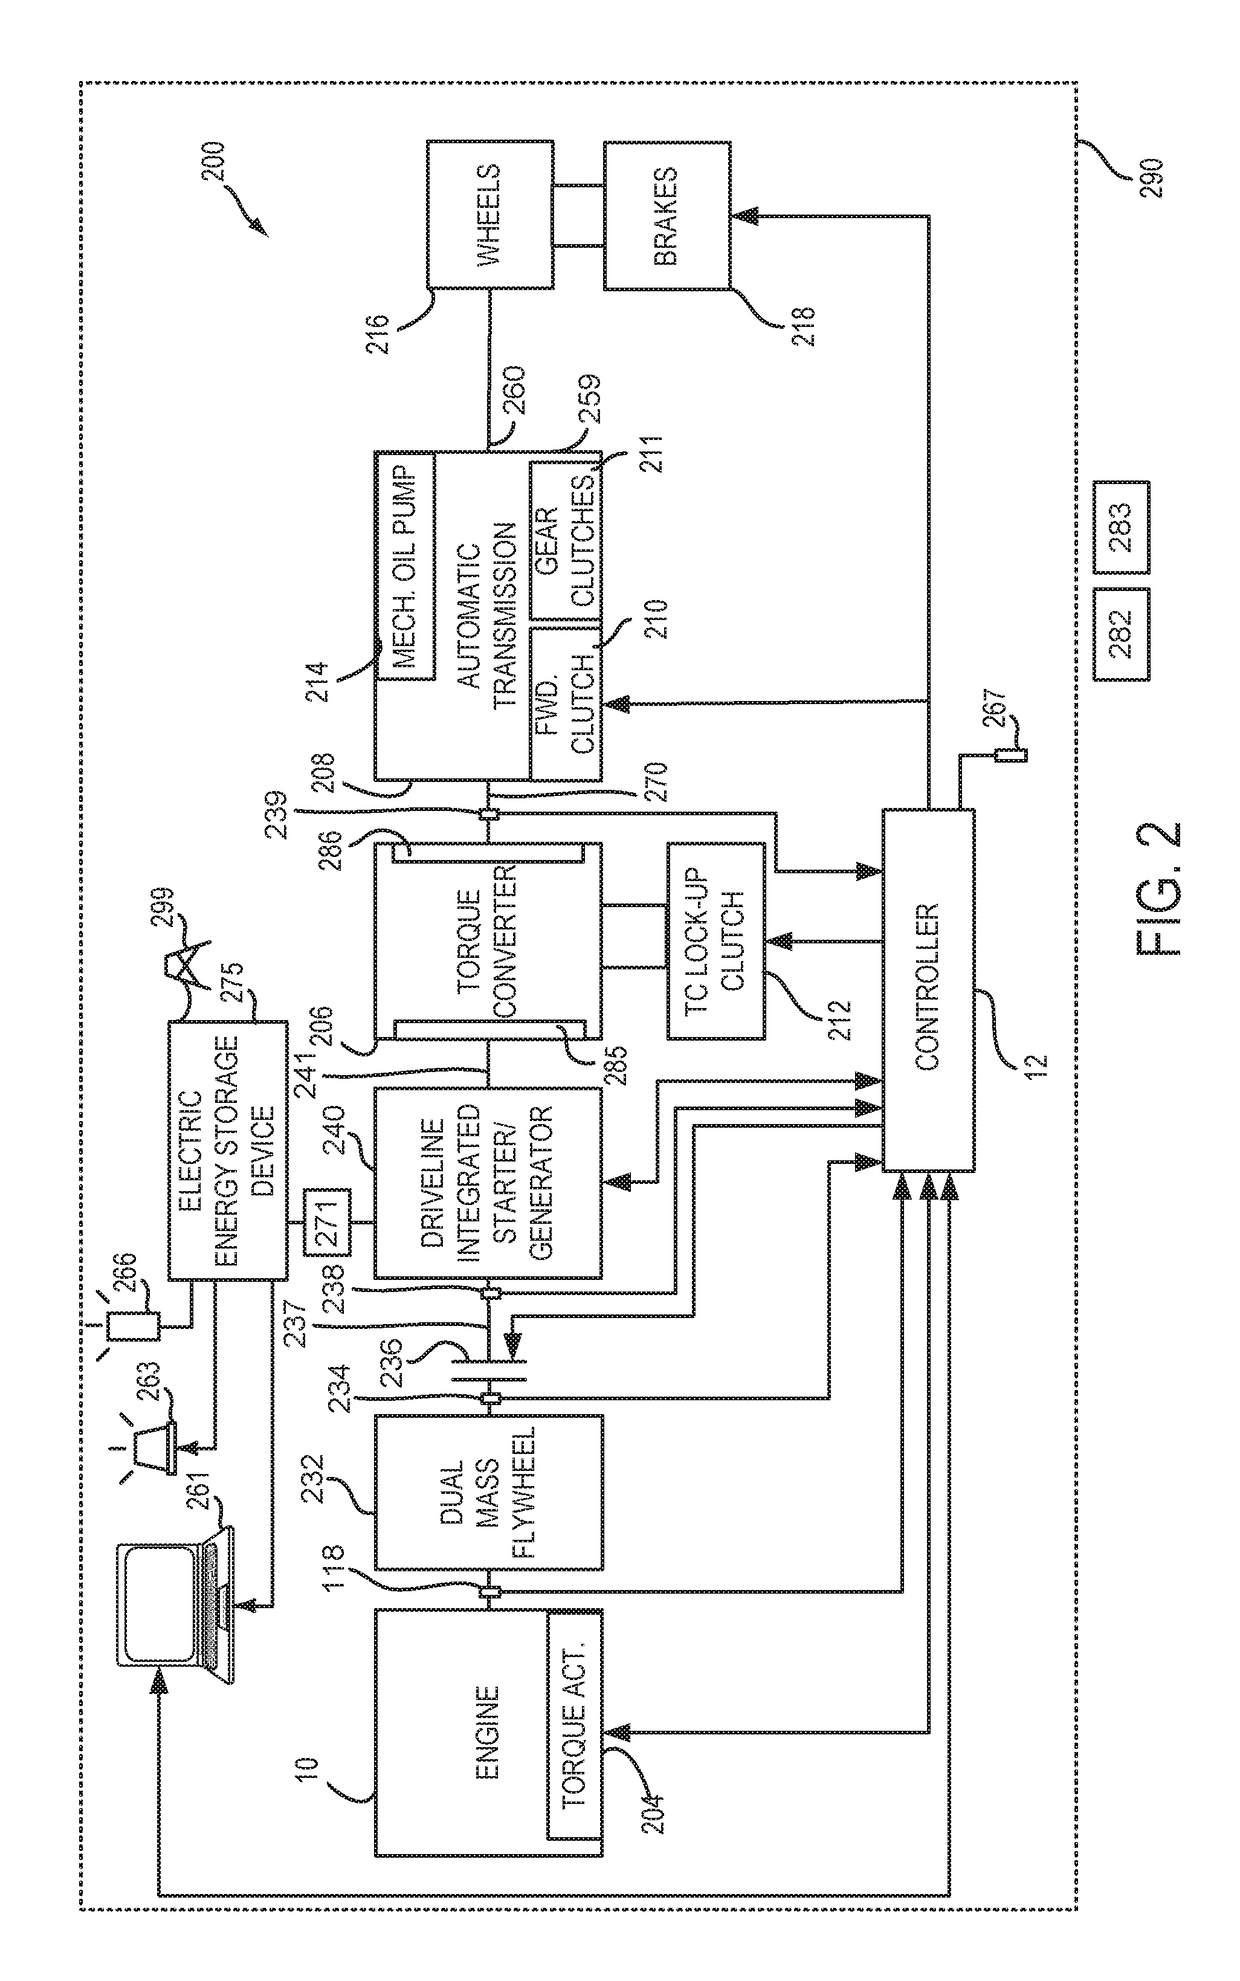 Methods and systems for extending electric idle